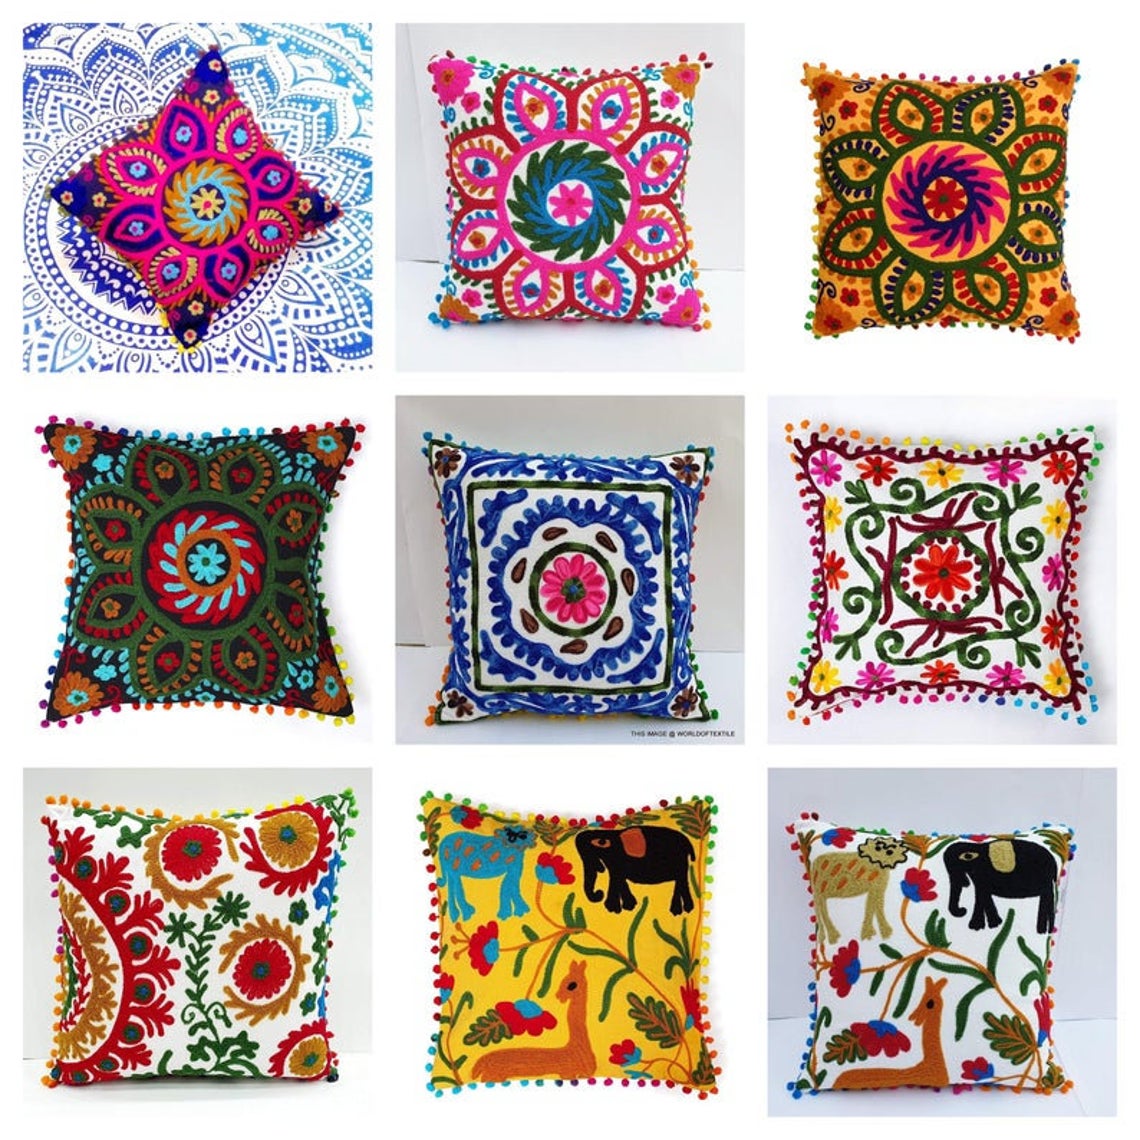 Indian Embroidered Suzani Pillow Cover Decorative Boho Throw Cotton Pillow Cases 